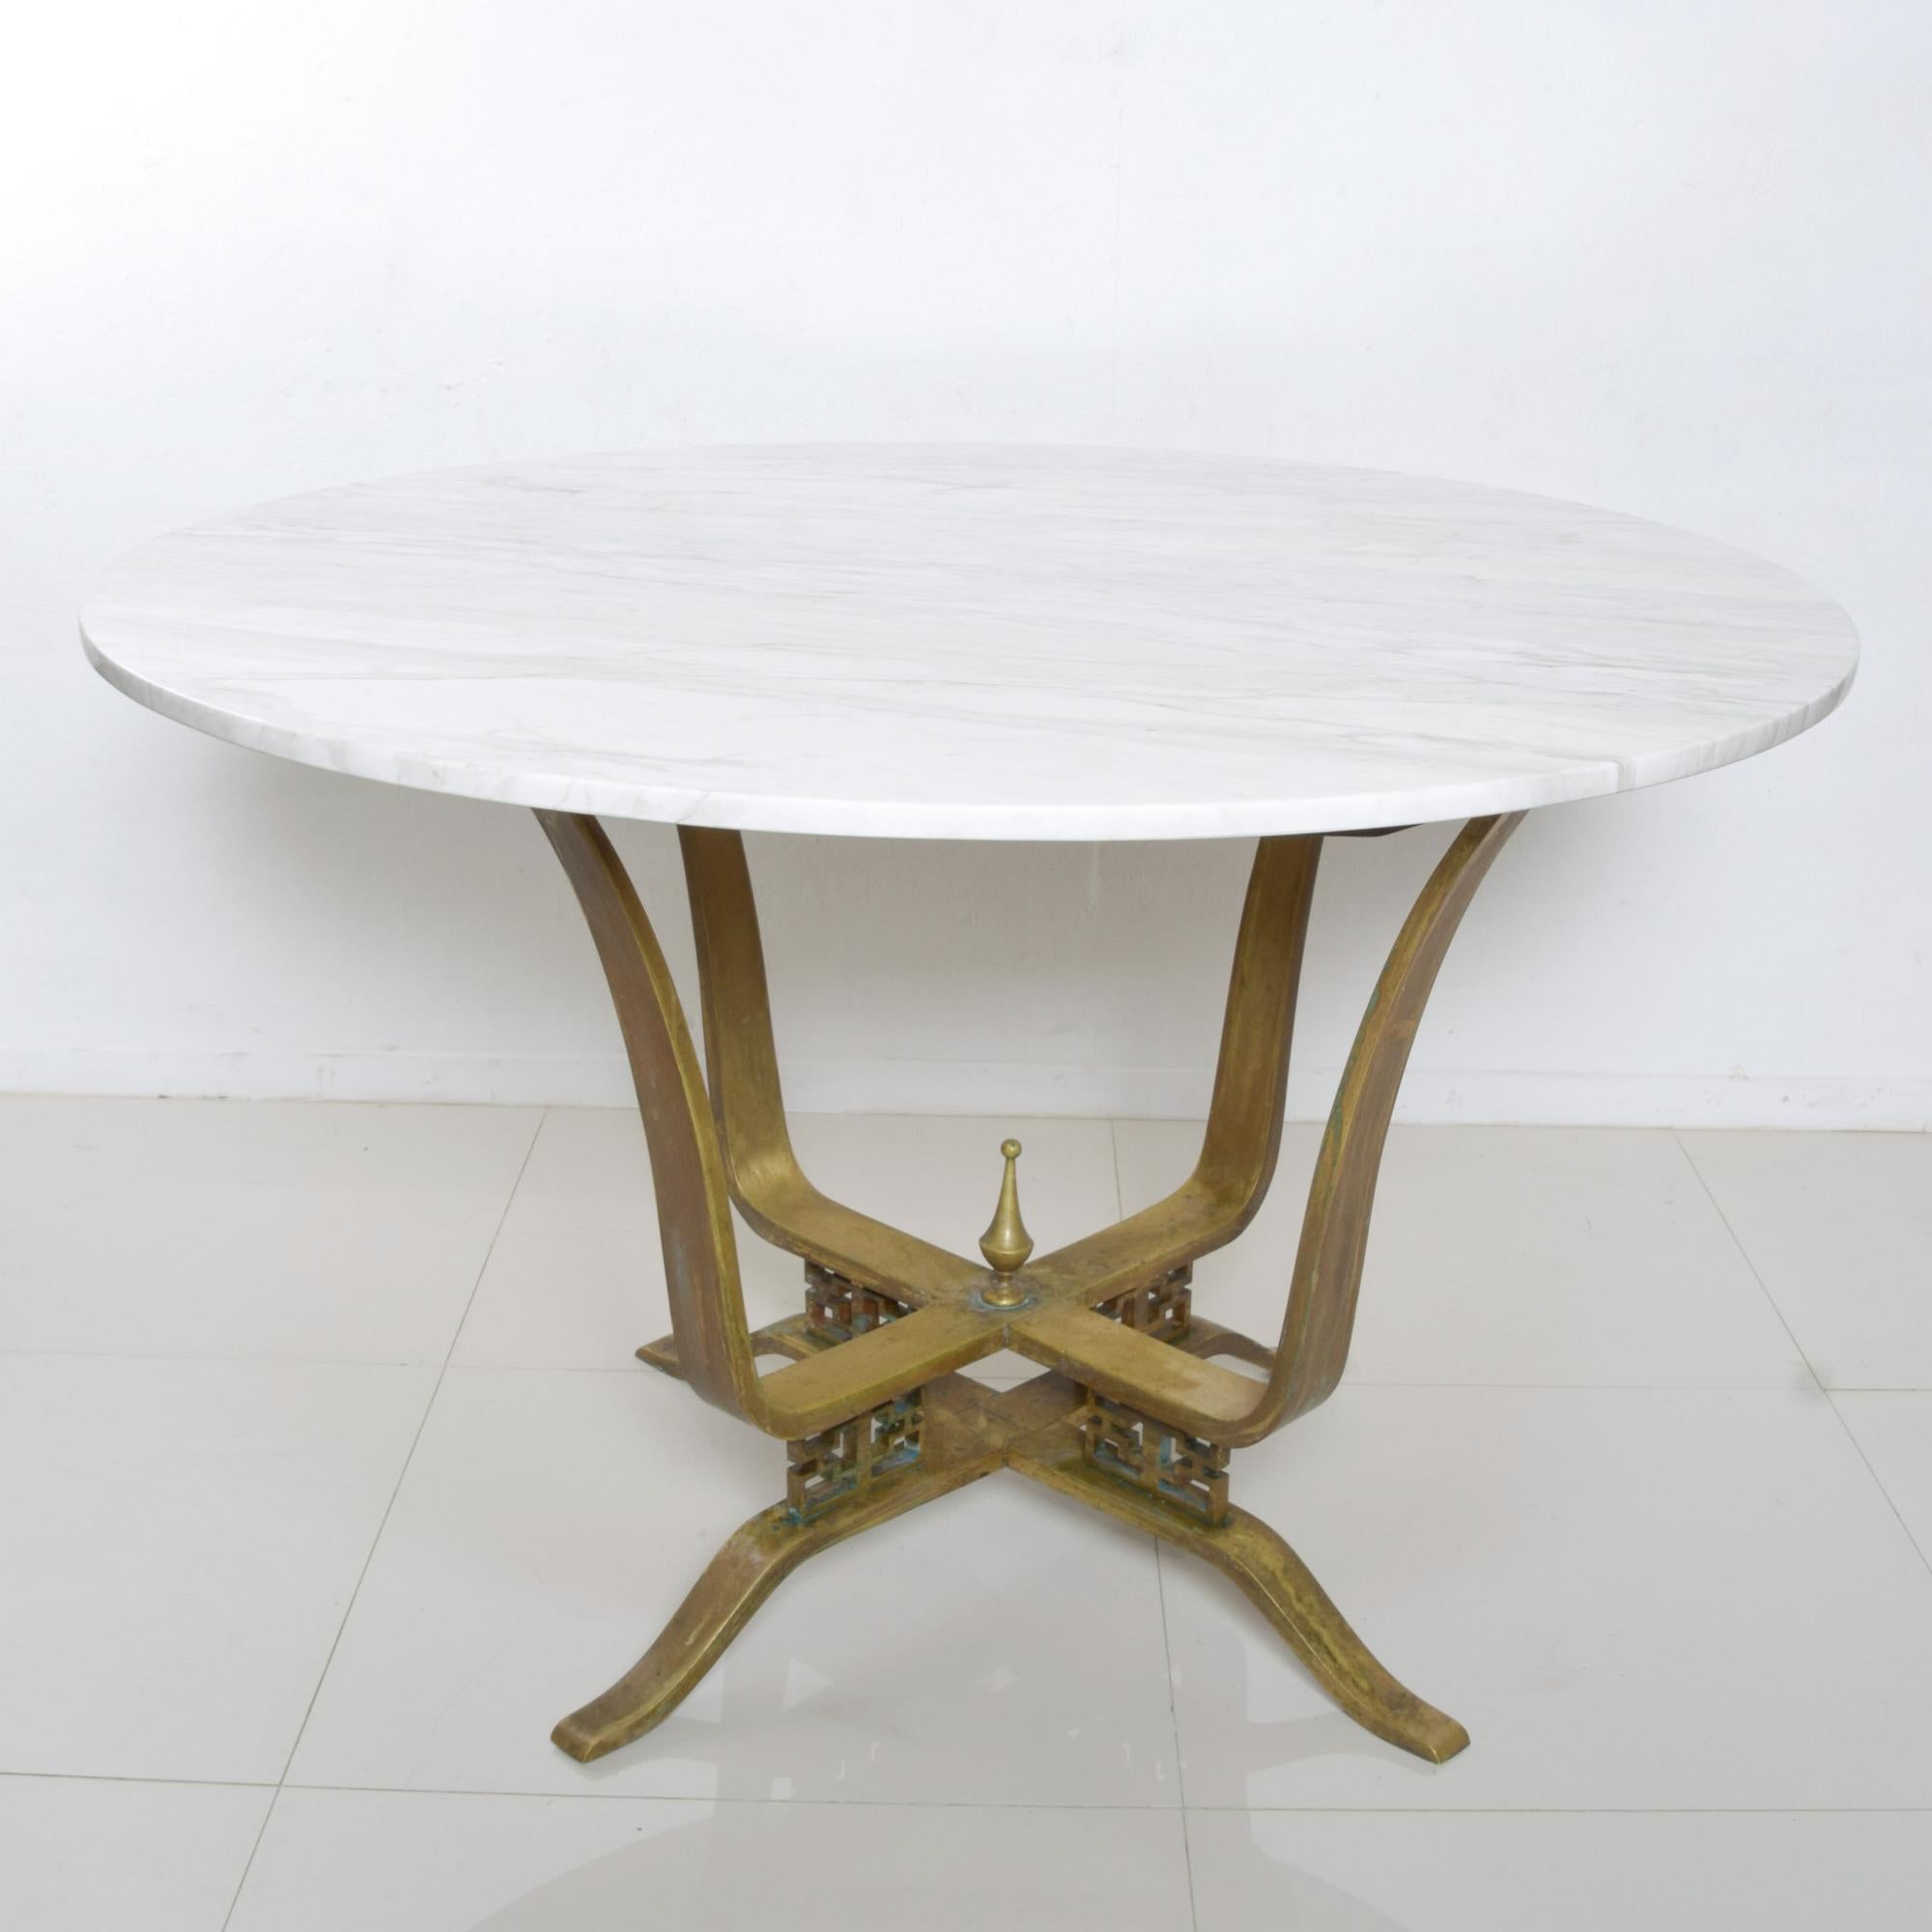 Arturo Pani Dining Table in Crisp White Marble on an intricately designed Bronze base featuring geometric modernist lines, Modernism Mexico 1950s
Stunningly elegant.
Dimensions: 29 1/2